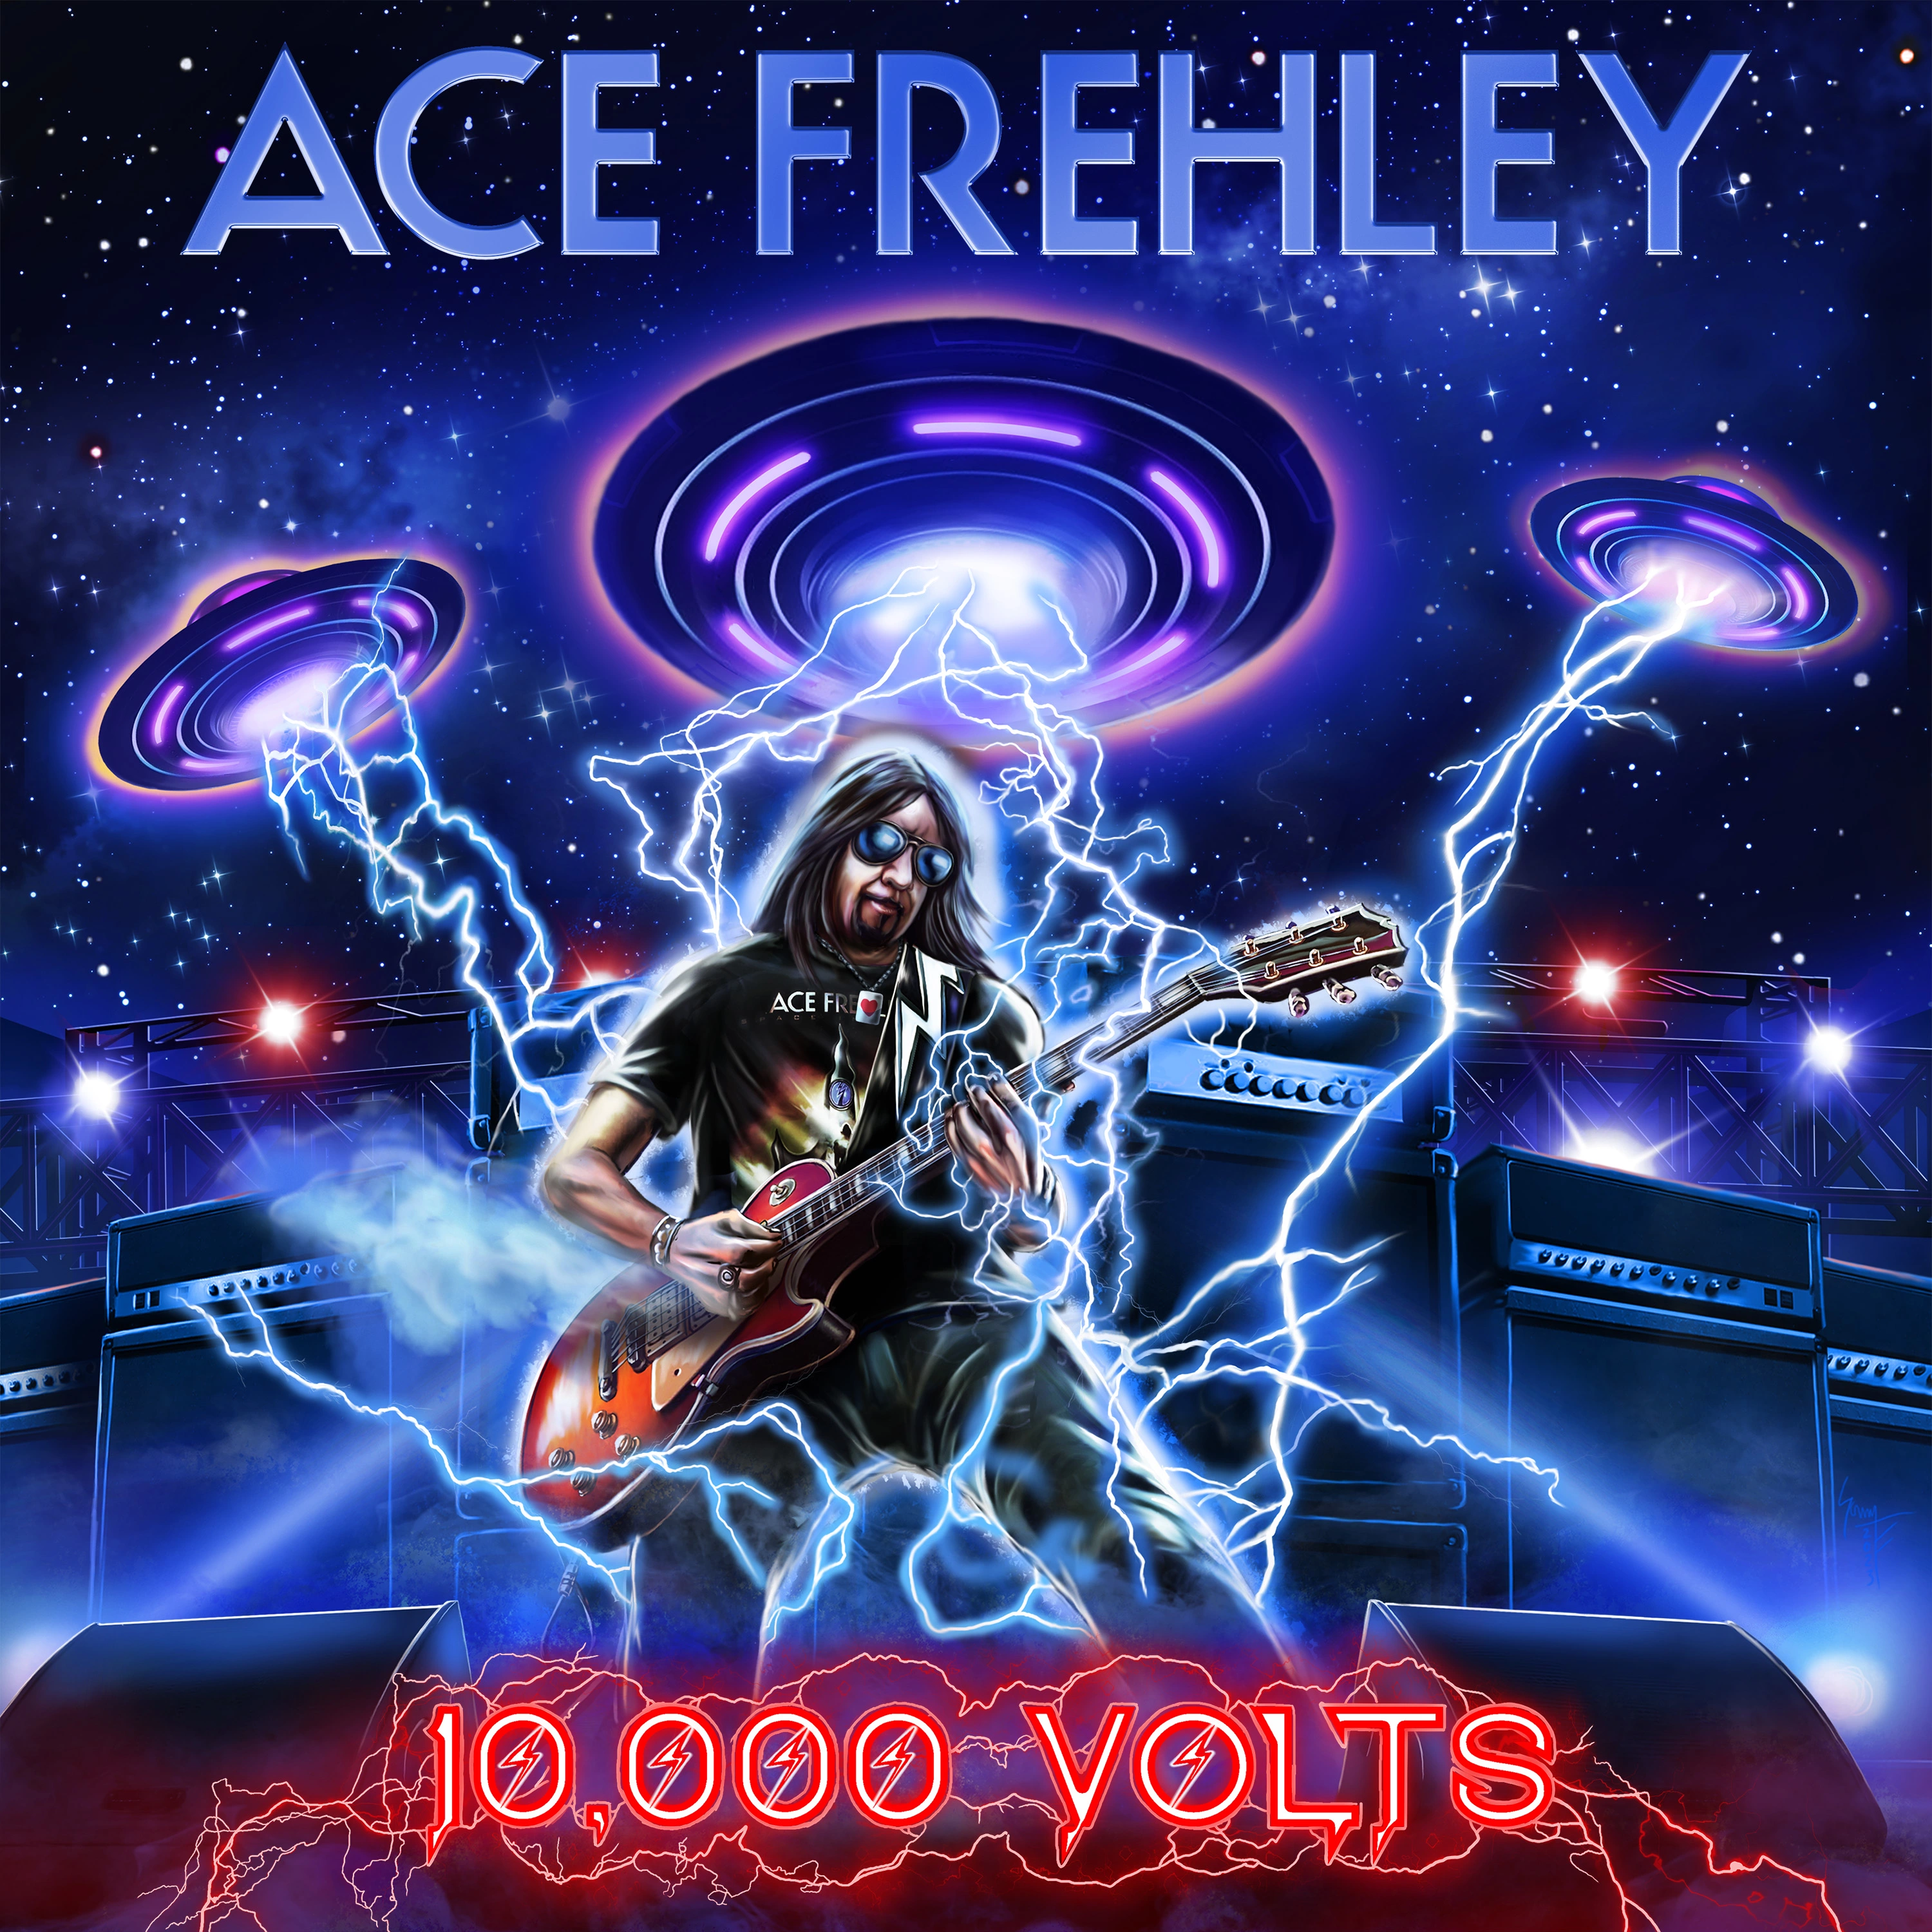 ACE FREHLEY - 10.000 Volts  [CD] - Photo 1/1